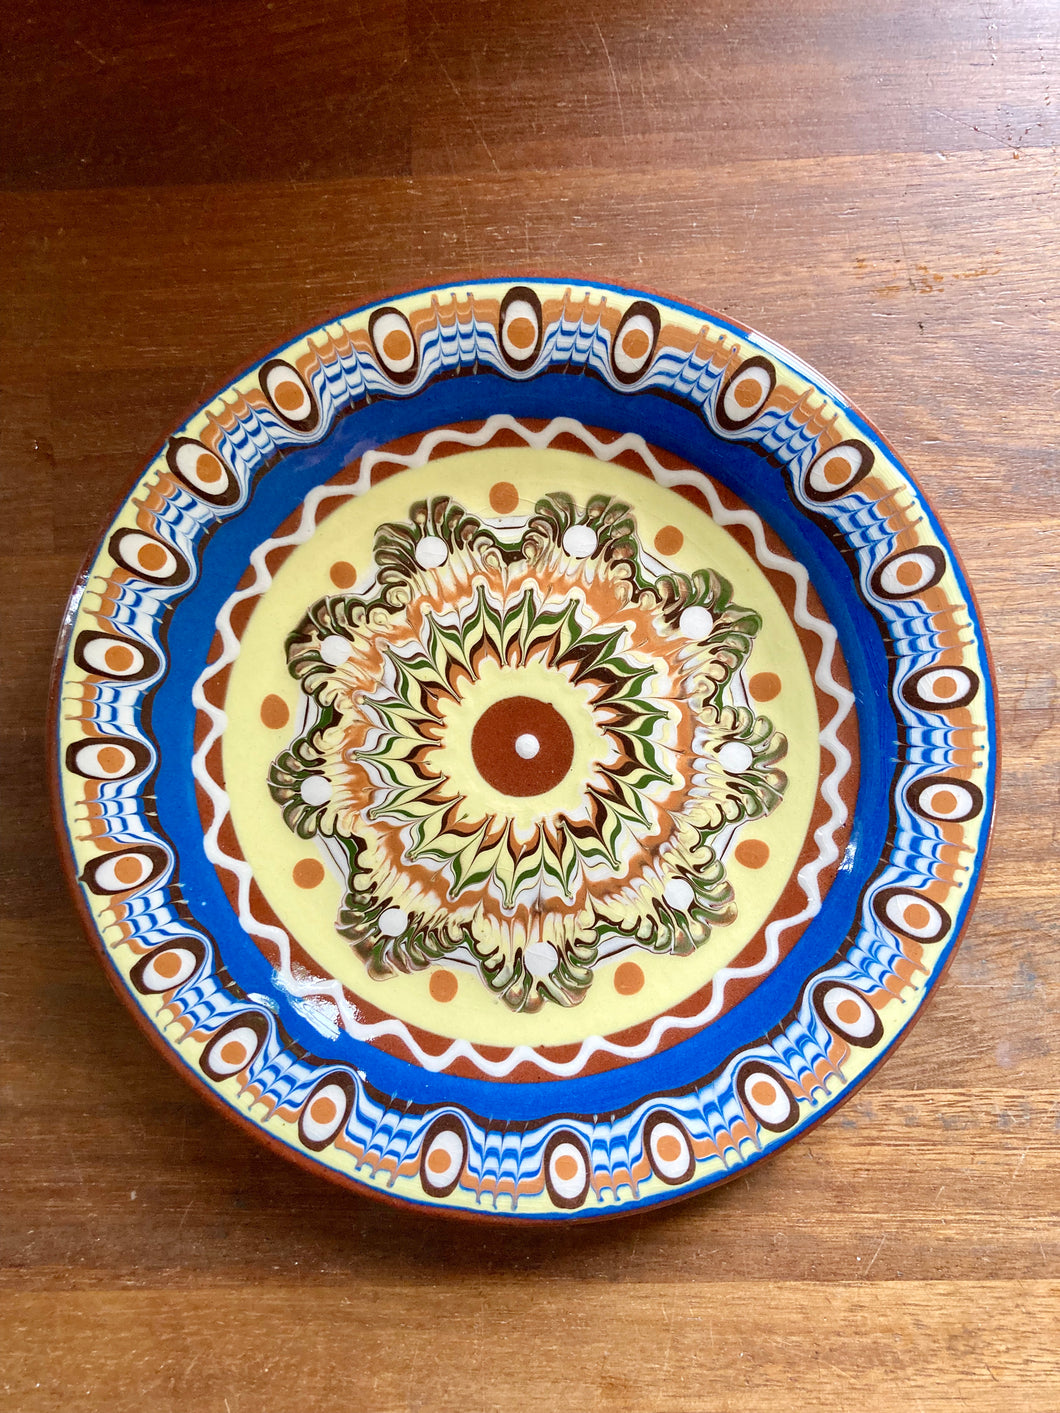 Enamel-style, hand decorated plate